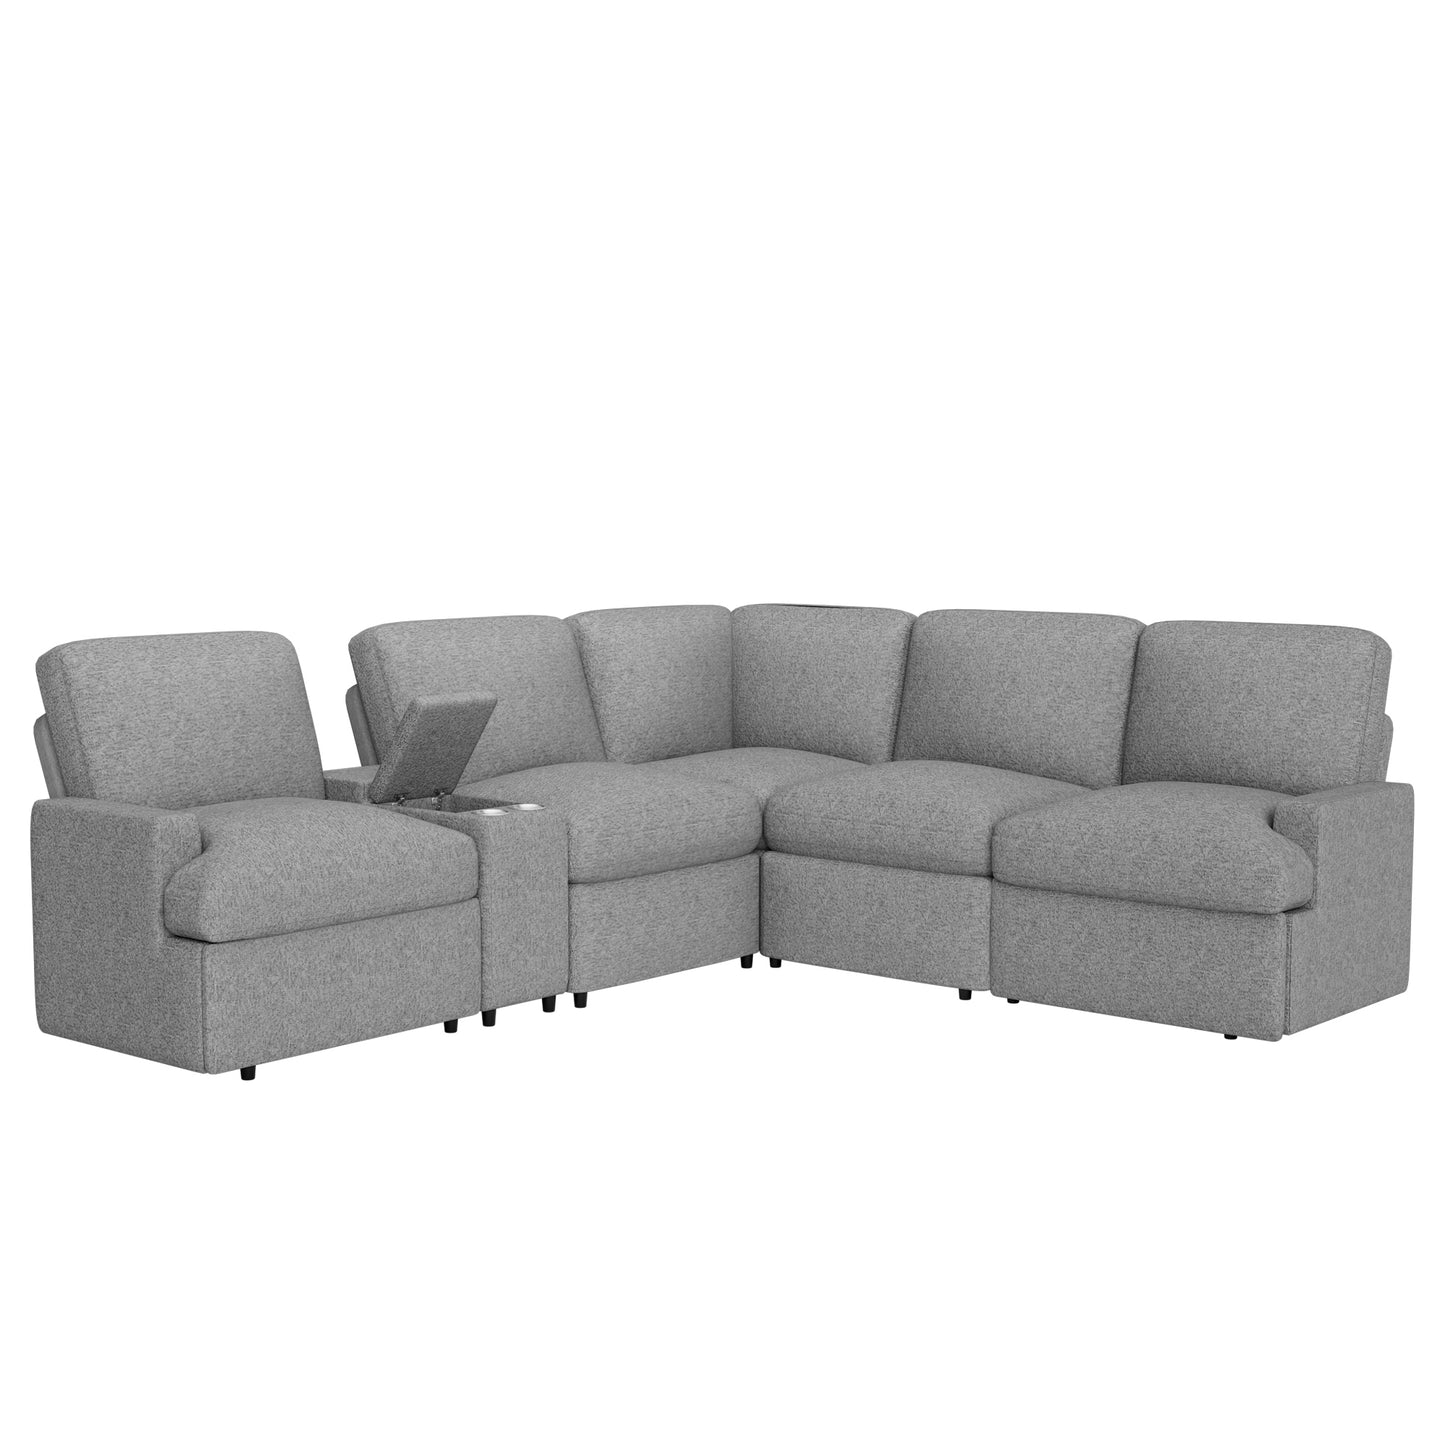 Power Recliner Corner Sofa Home Theater Reclining Sofa Sectional Couches with Storage Box, Cup Holders, USB Ports and Power Socket for Living Room, Grey